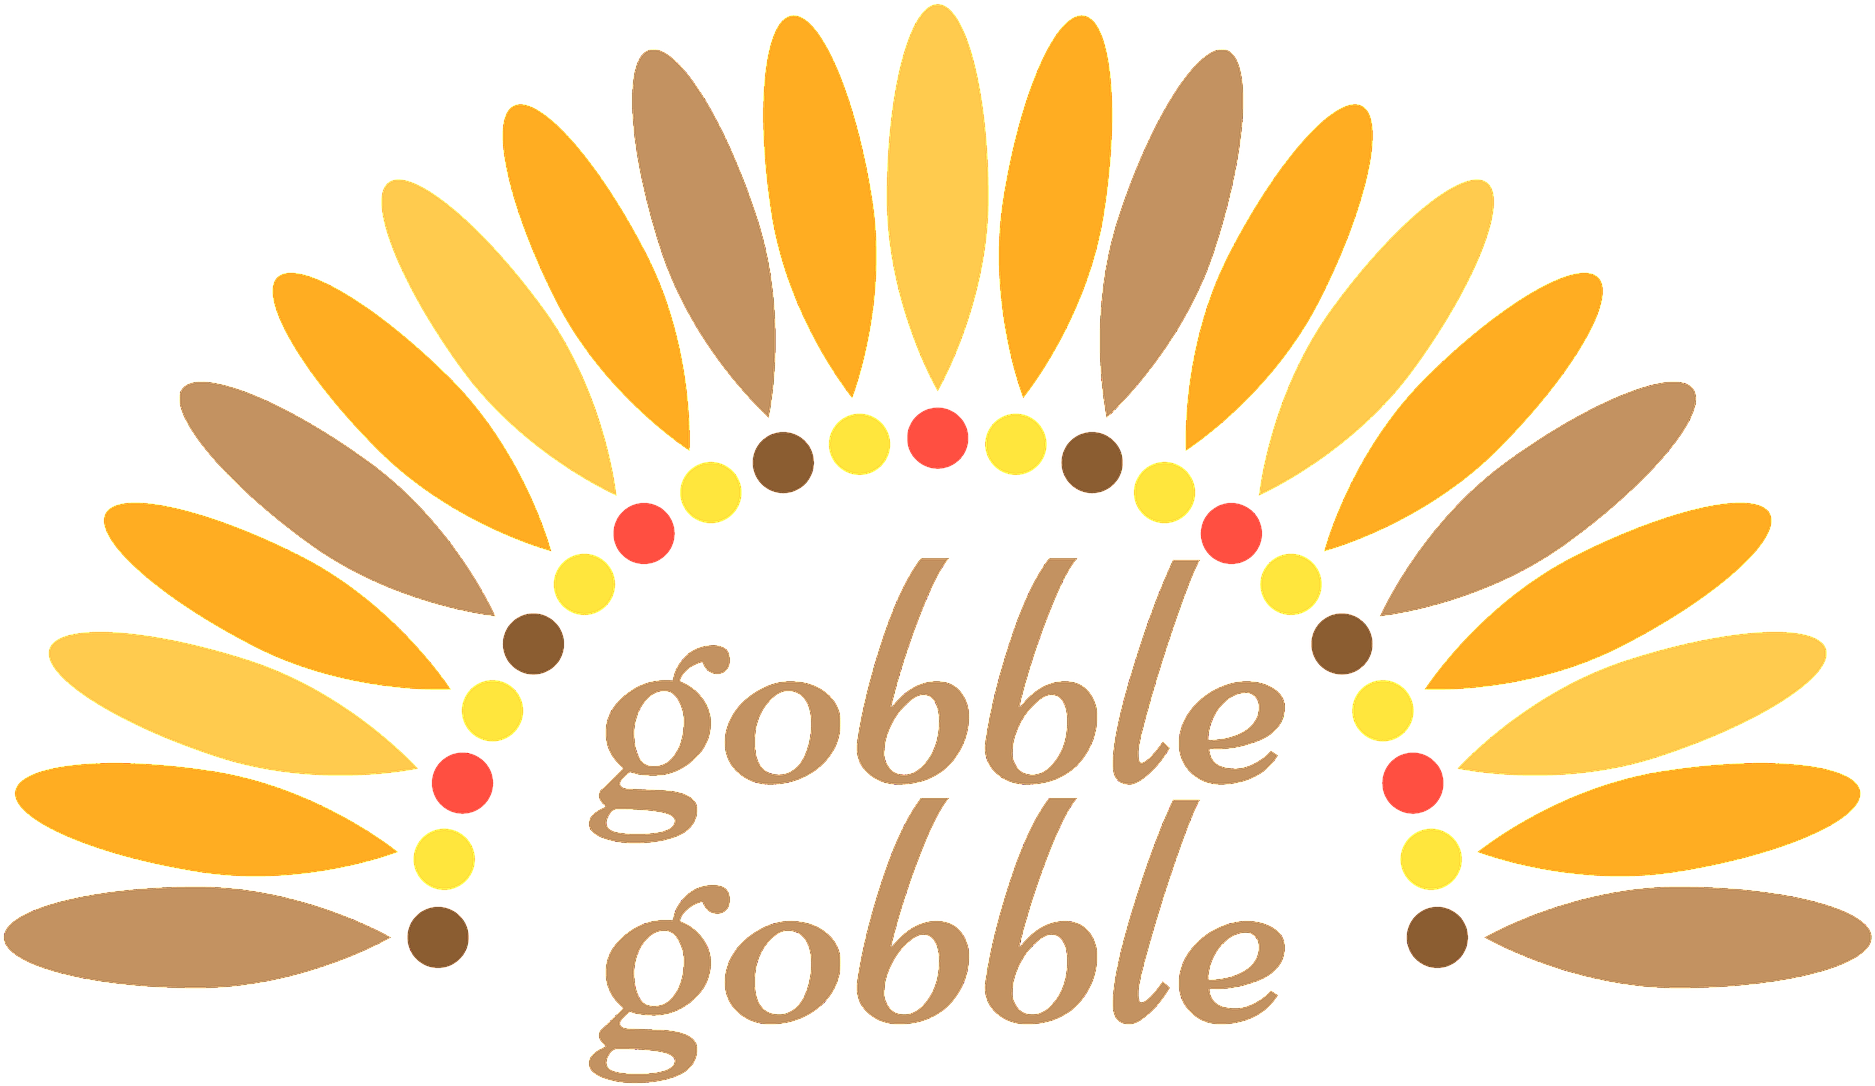 Thanksgiving Turkey Feathers Gobble Graphic PNG